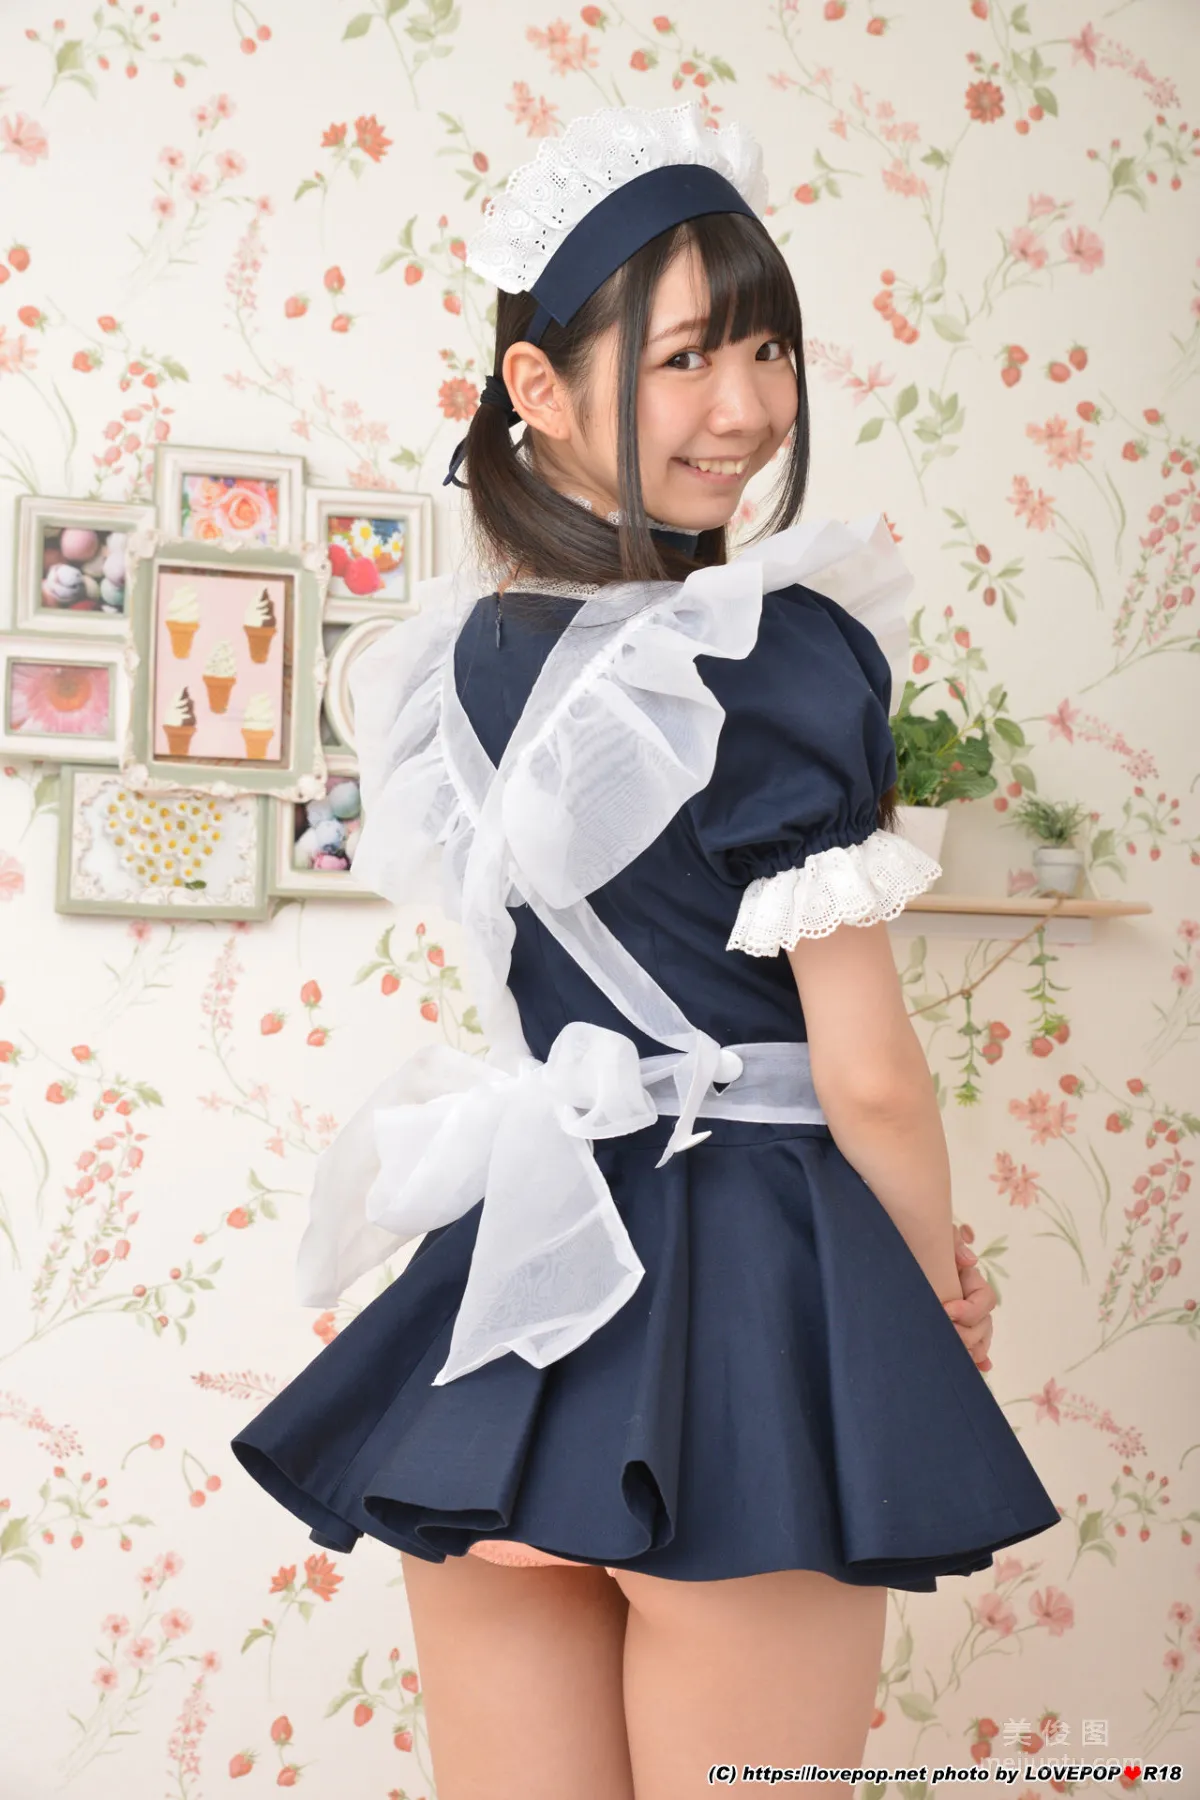 [LOVEPOP] Special Maid Collection - 白井ゆずか Photoset 0111